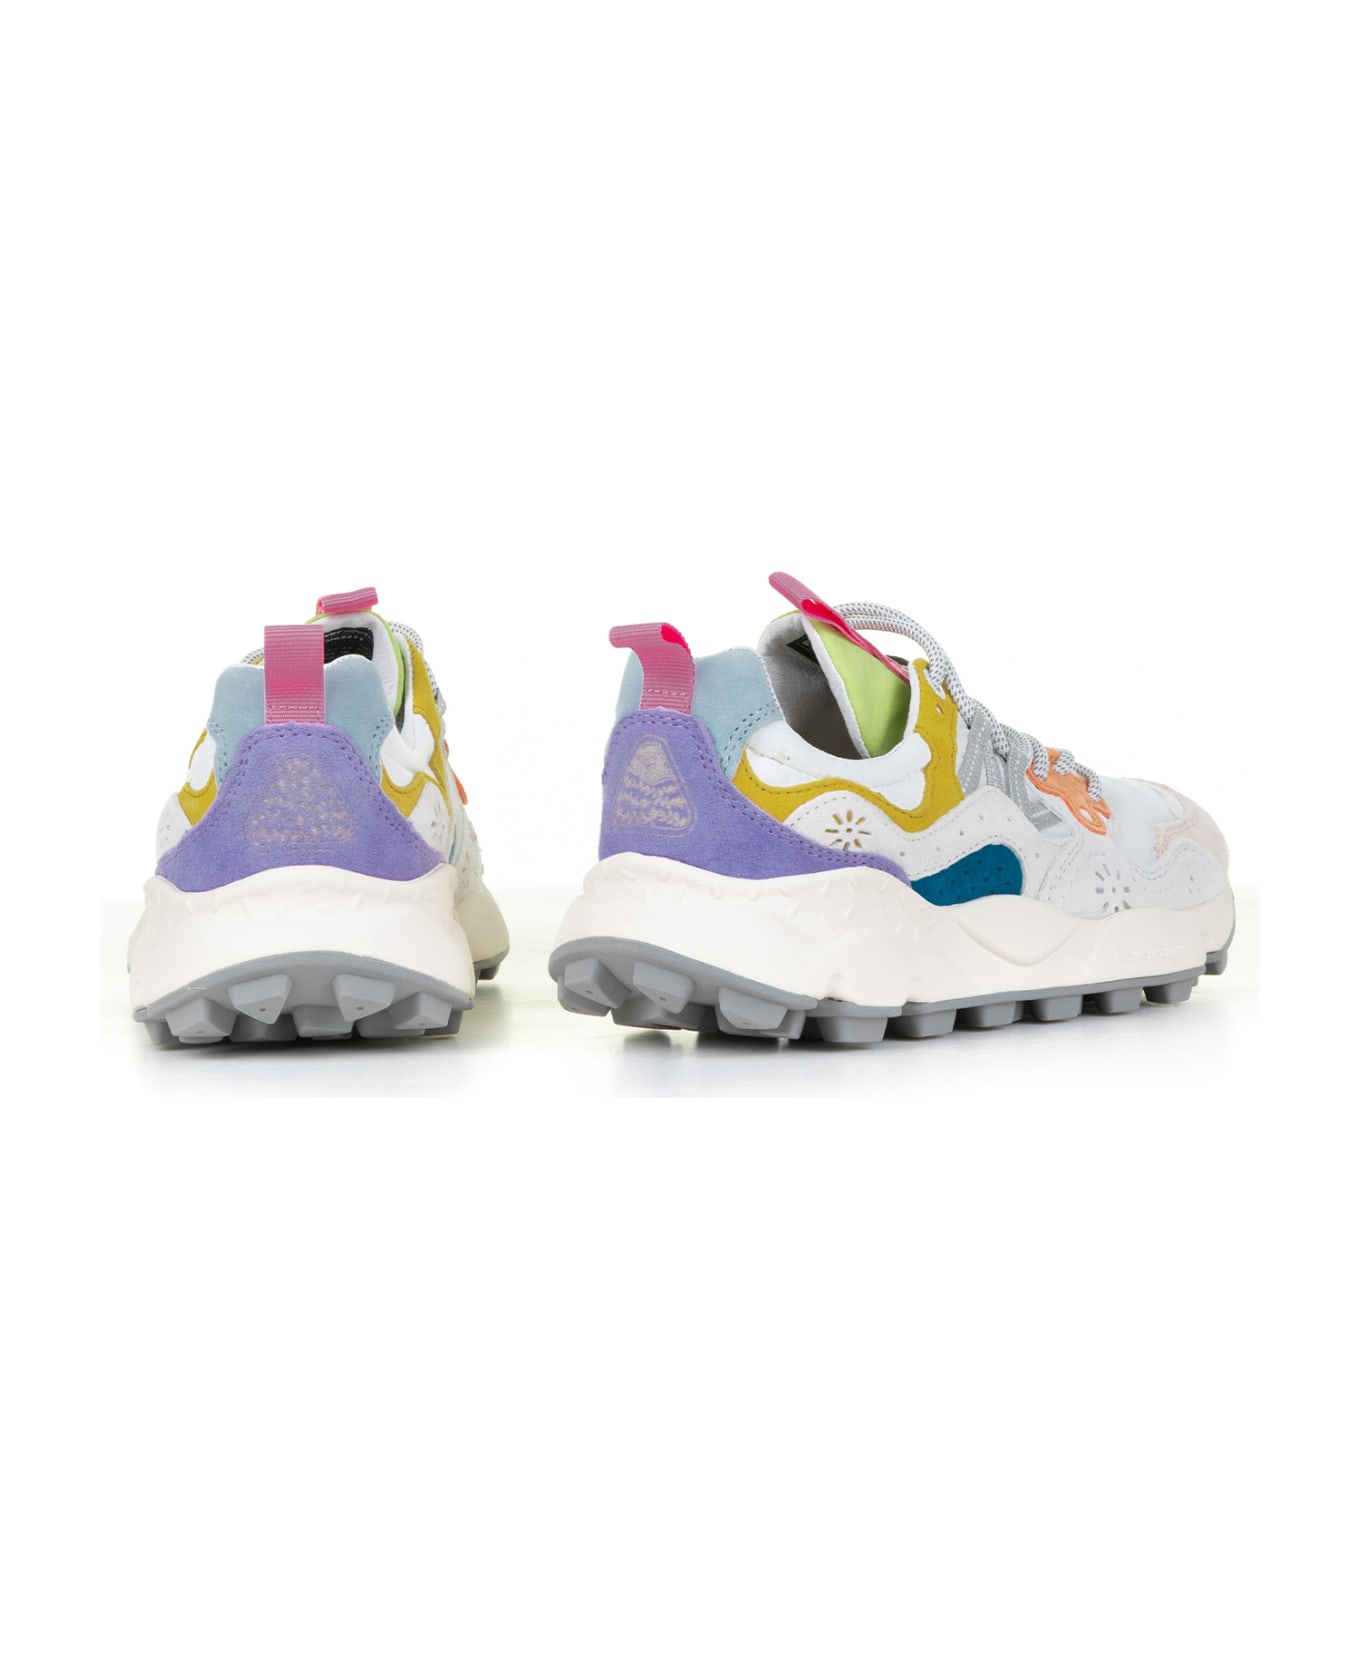 Flower Mountain Multicolored Yamano Sneakers In Suede And Nylon - WHITE PINK